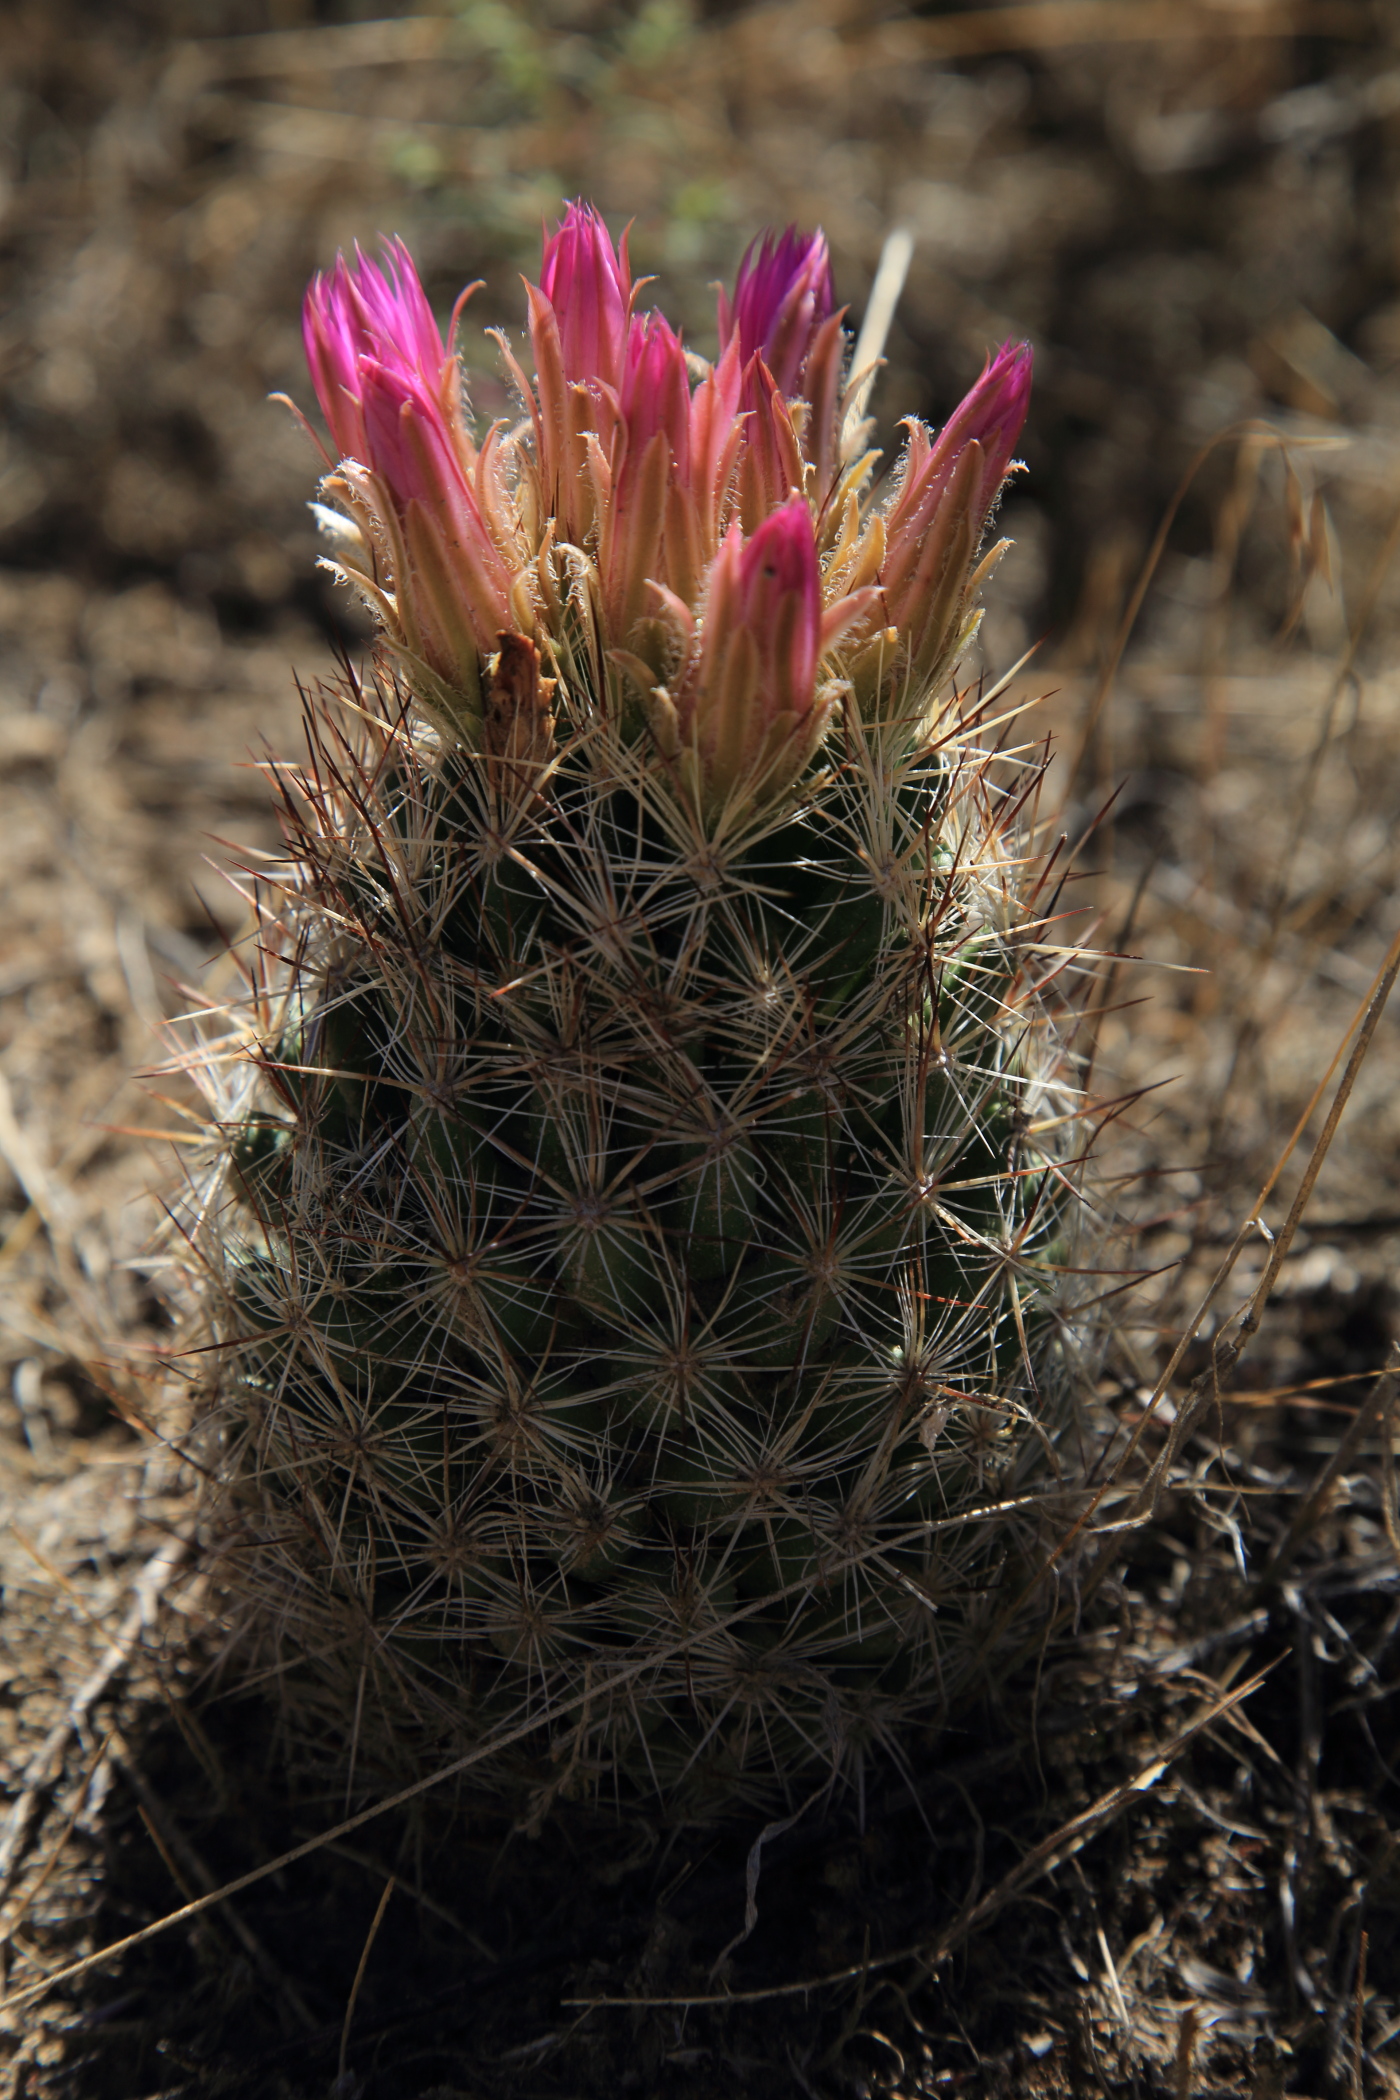 Greater Chaco, New Mexico, hosts a few rare plant species like this Clover’s cactus, once a candidate for listing under the Endangered Species Act.